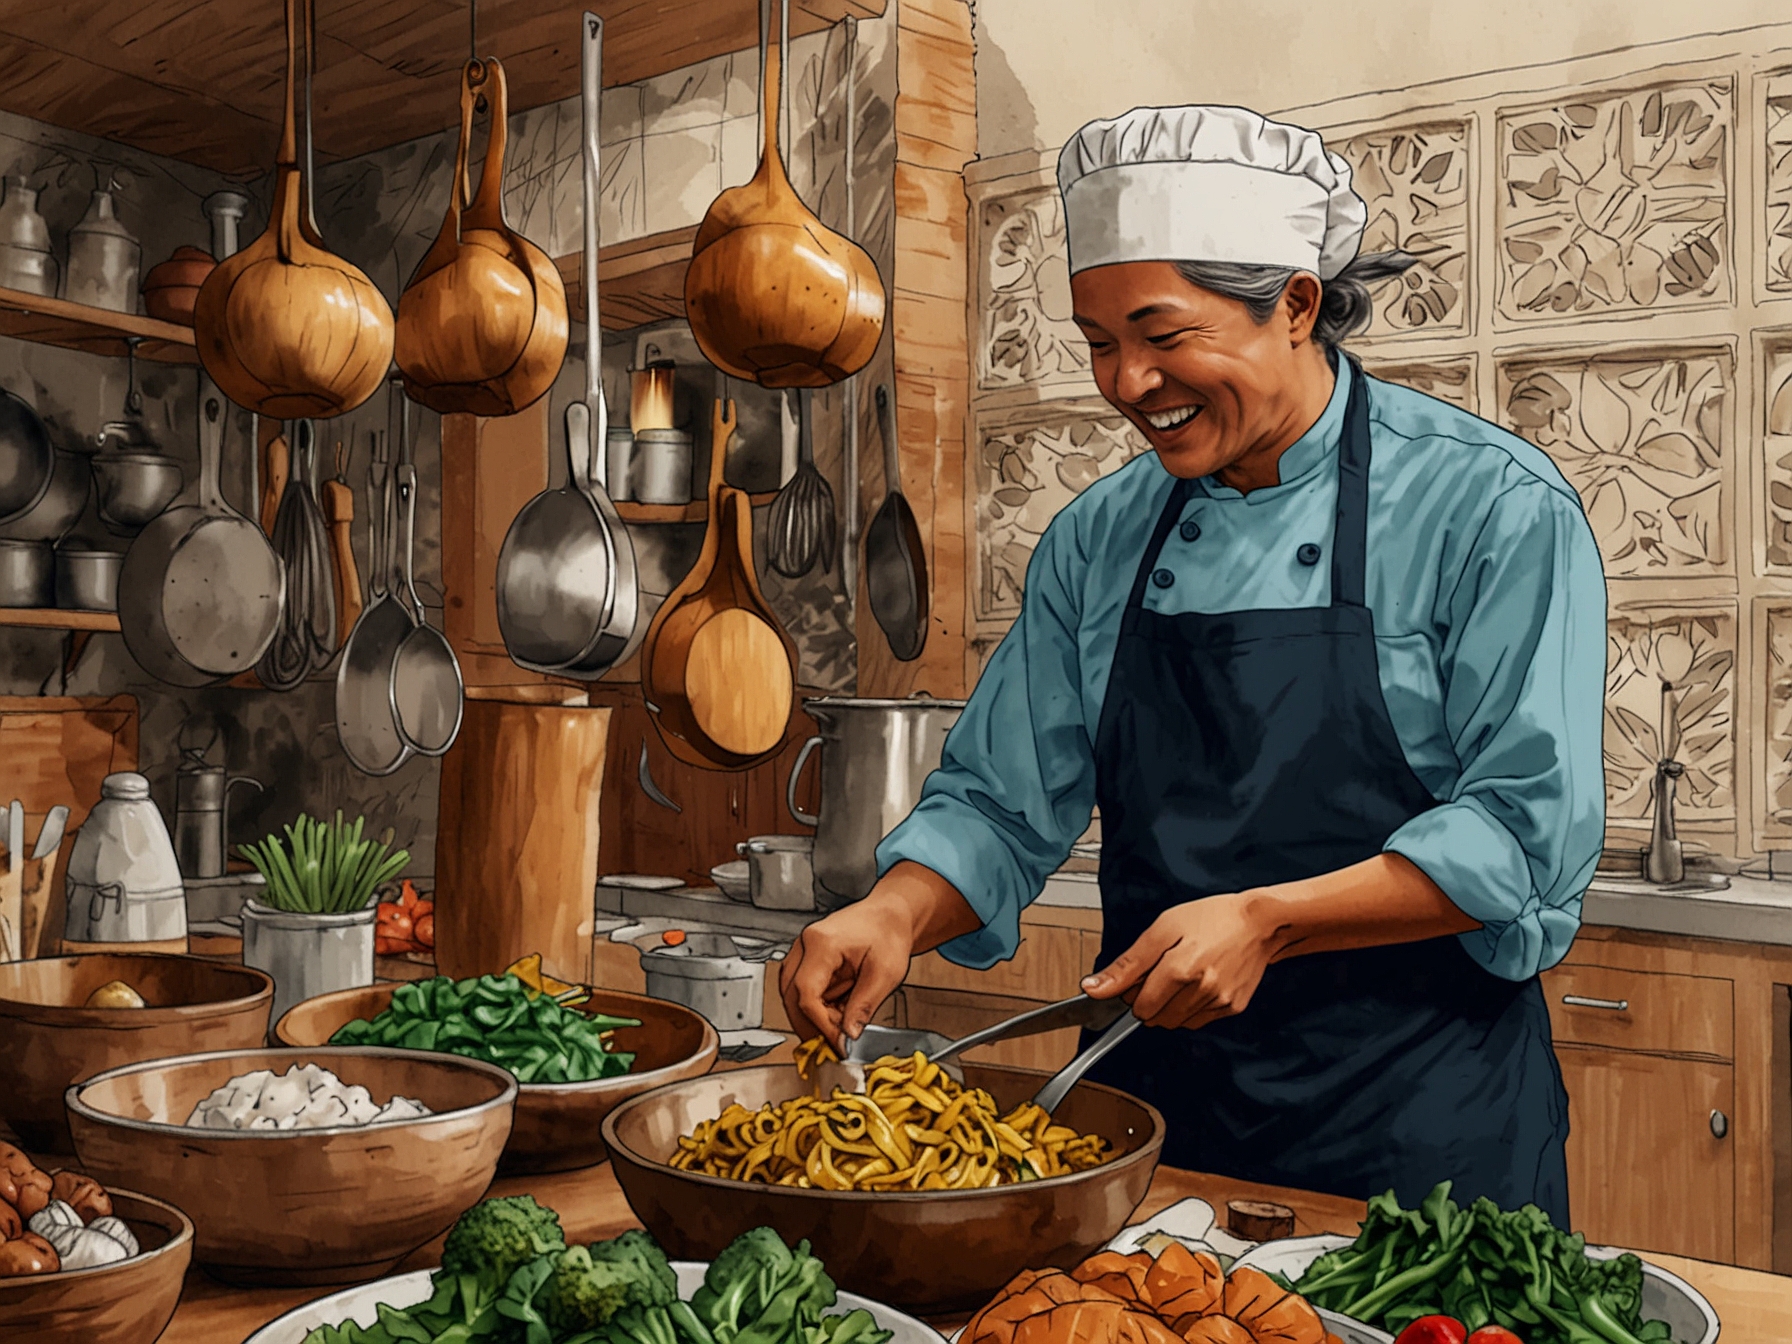 A montage of diverse culinary traditions from around the world, showcasing innovative methods to combat climate change as featured in the 'Omnivore' docuseries.